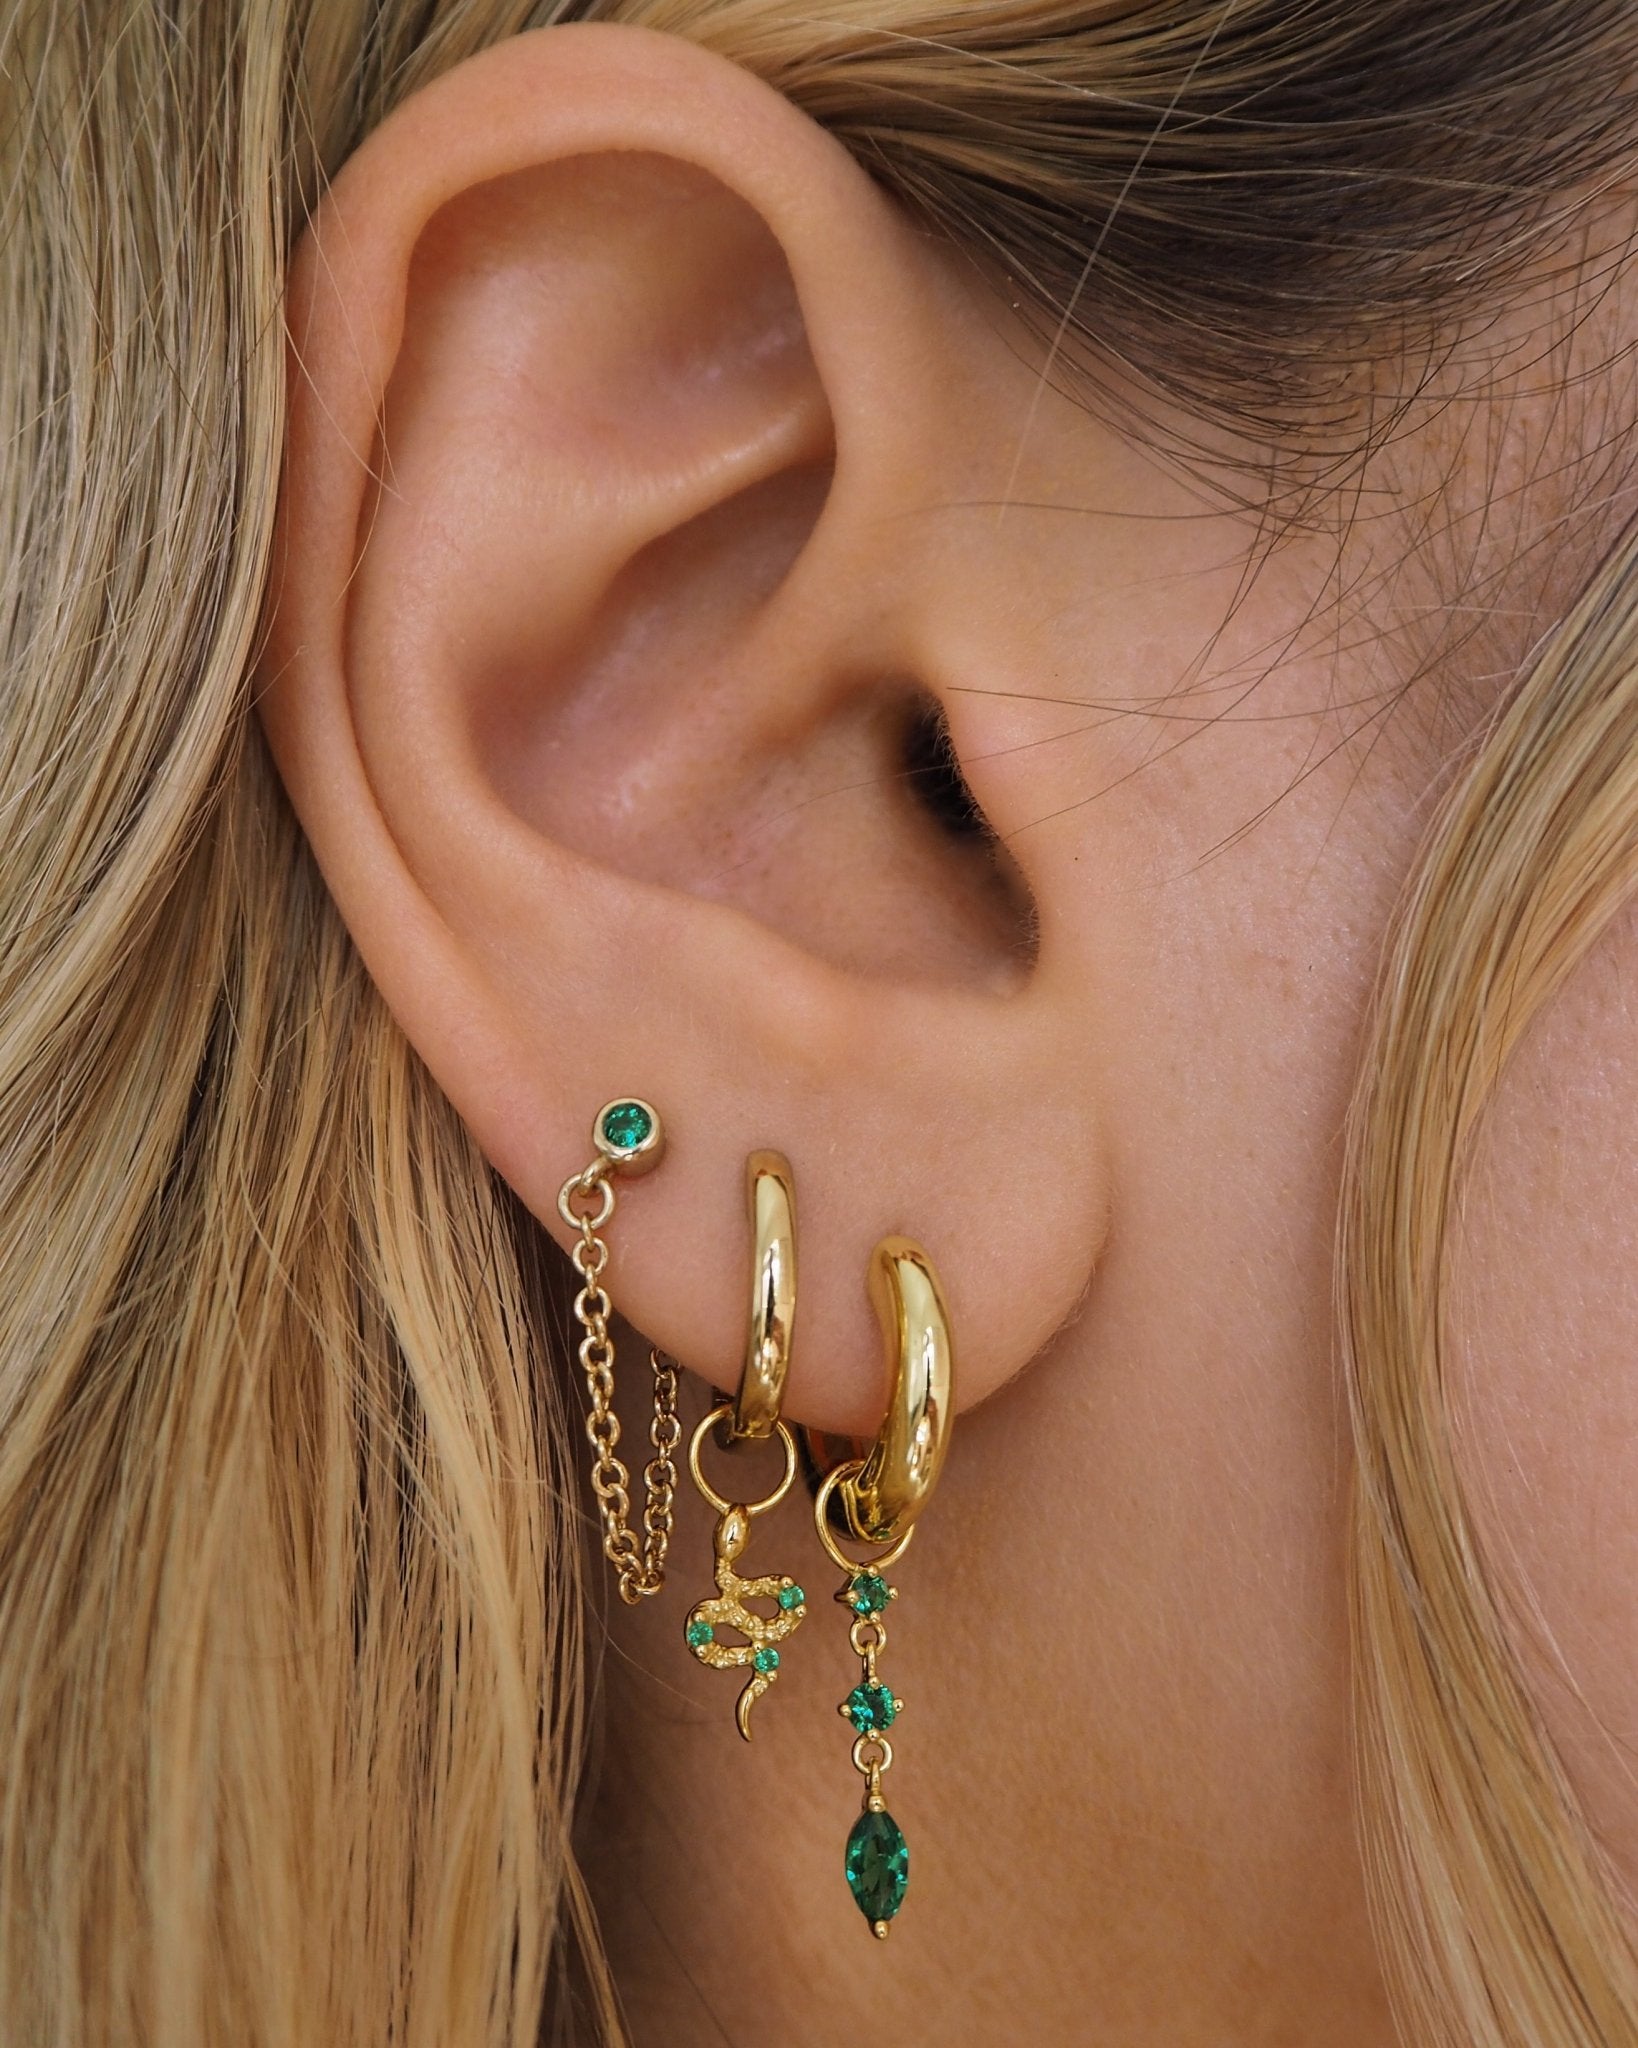 Rio earrings - five and two jewelry